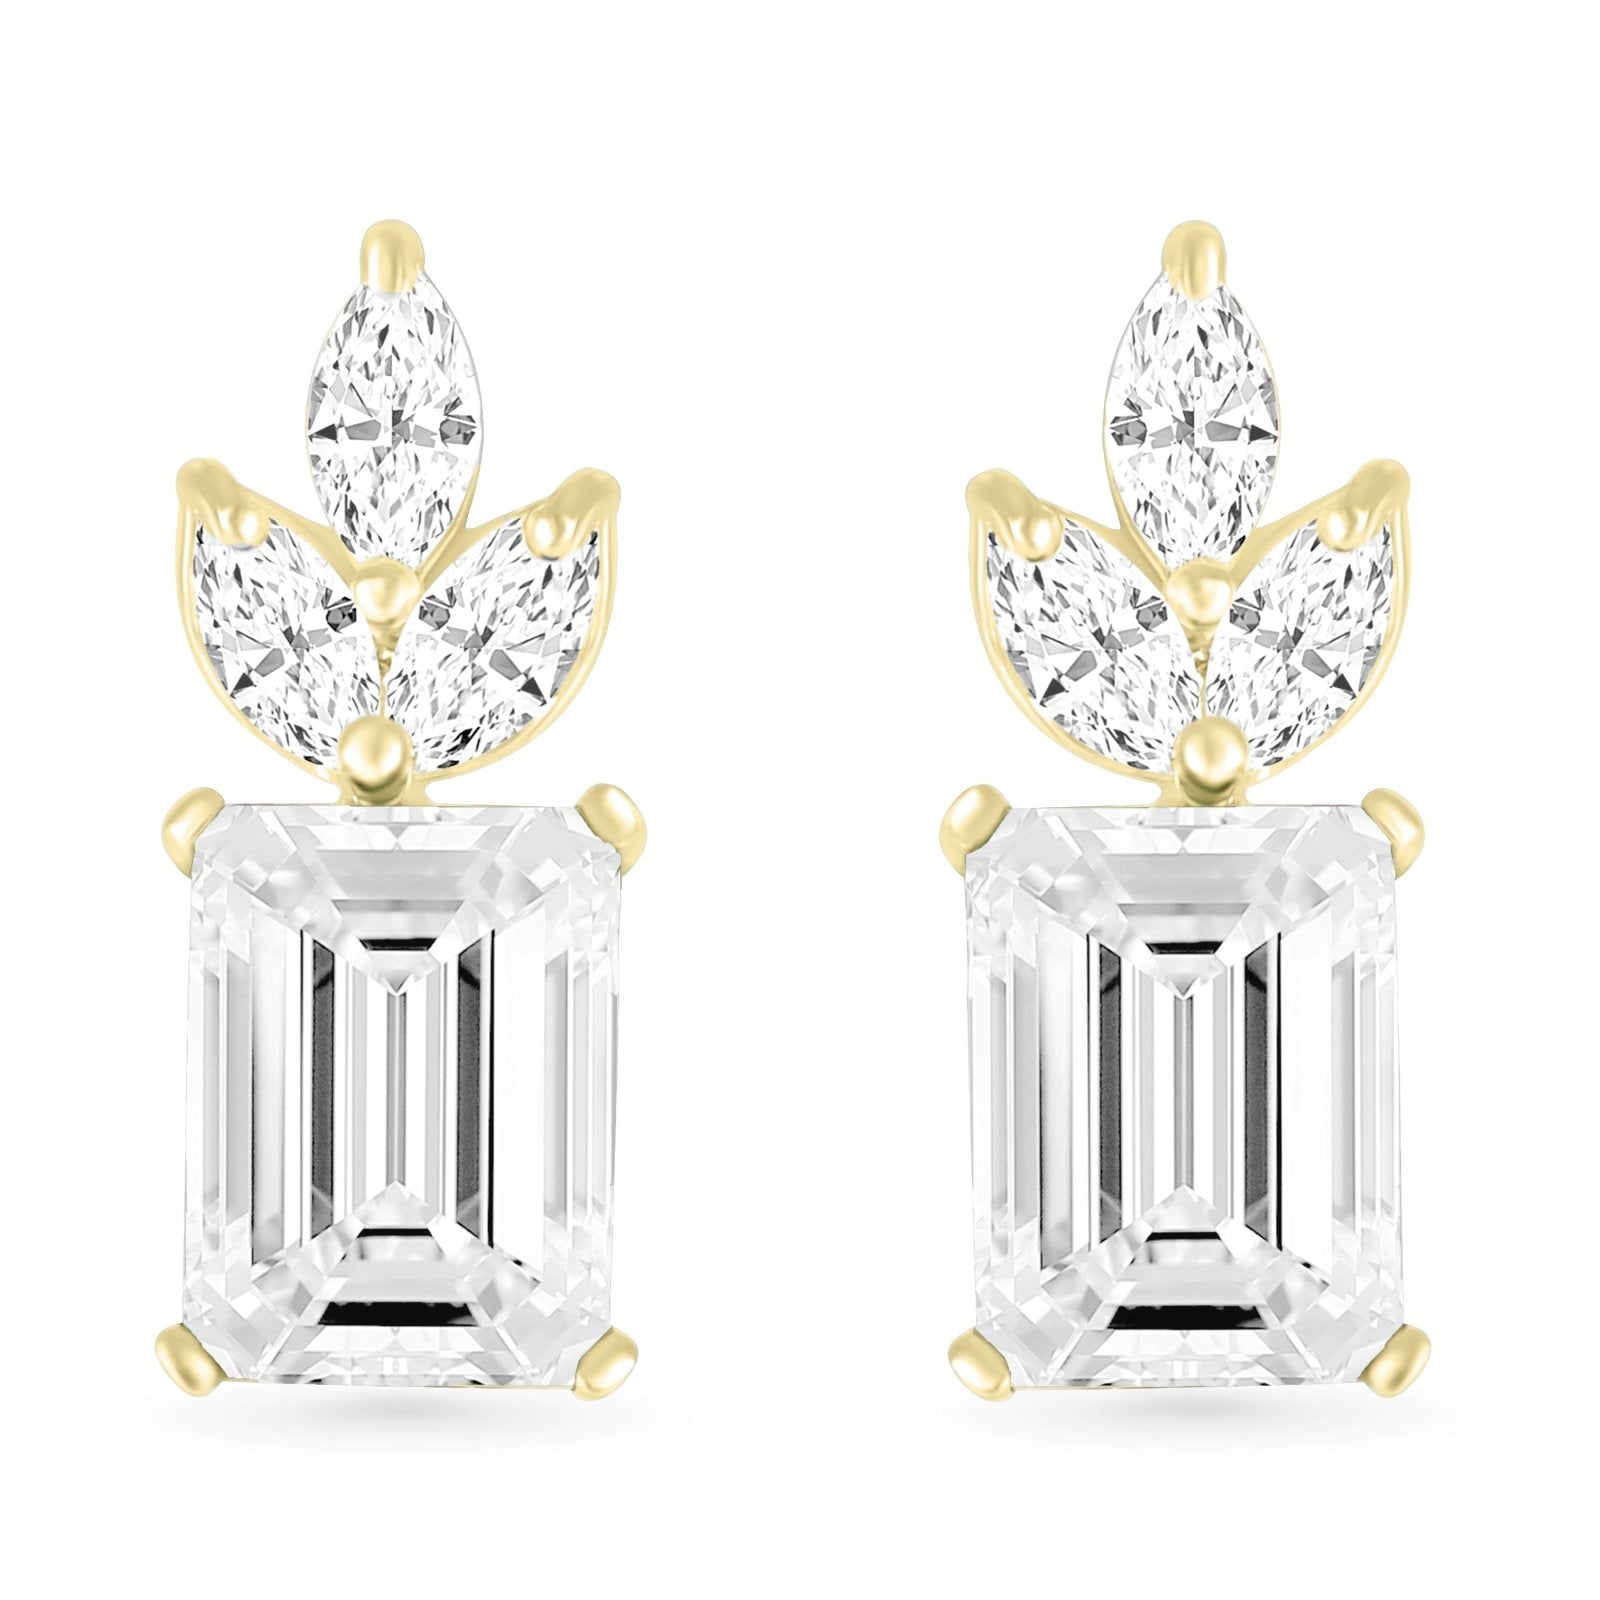 White Sapphire Emerald and Marquise Cut Studs Earrings Estella Collection #product_description# 32662 Birthstone Birthstone Earrings Birthstone Jewelry #tag4# #tag5# #tag6# #tag7# #tag8# #tag9# #tag10#